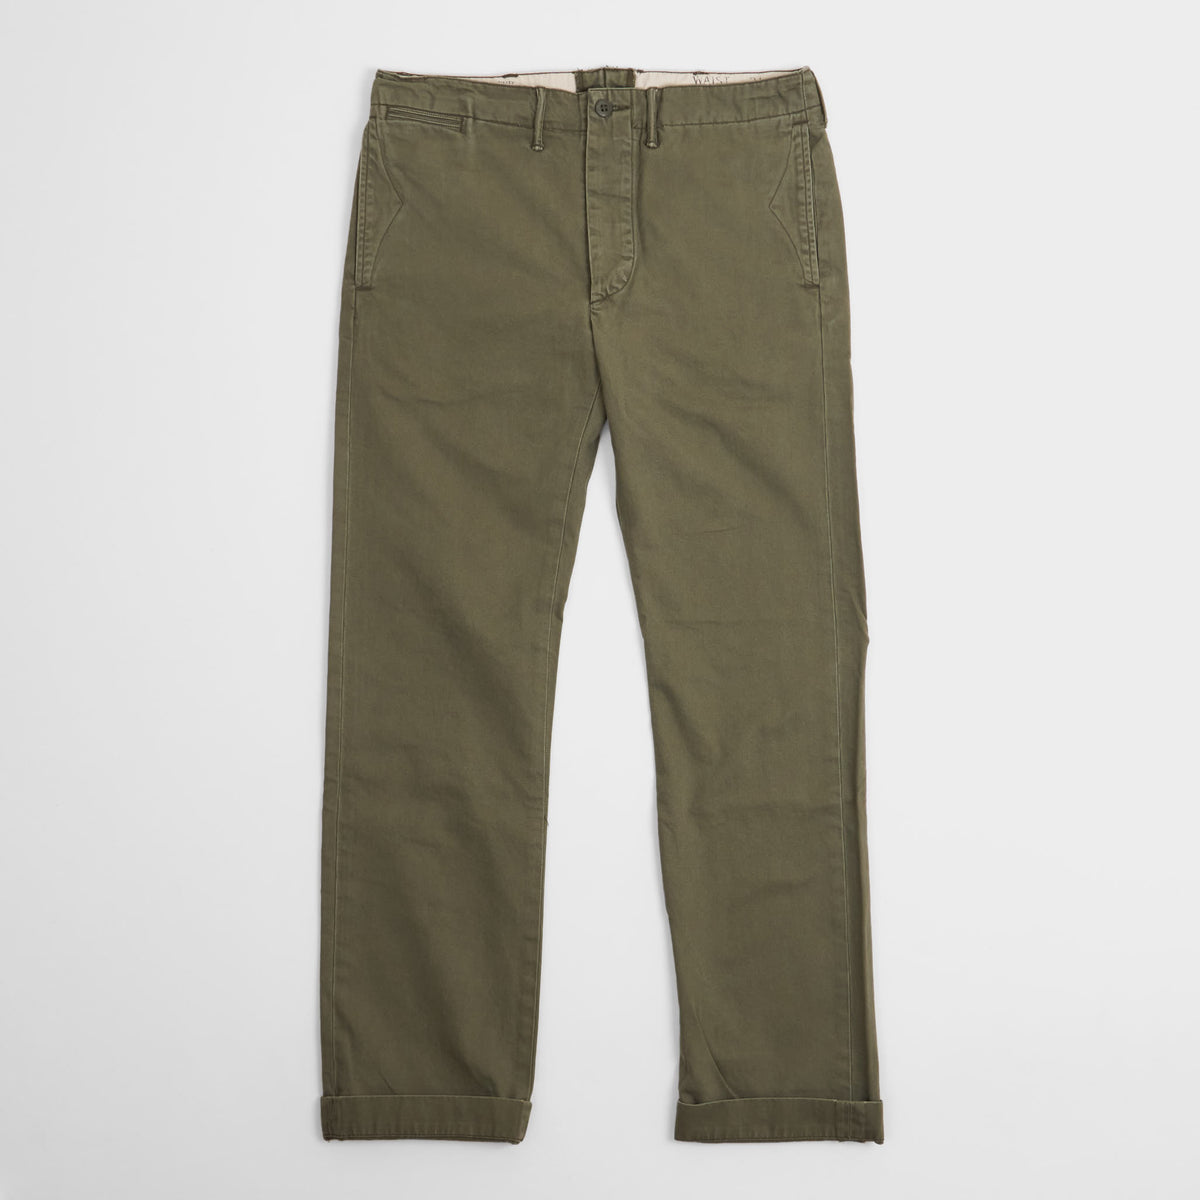 Double RL Officers Classic Chinos Regular